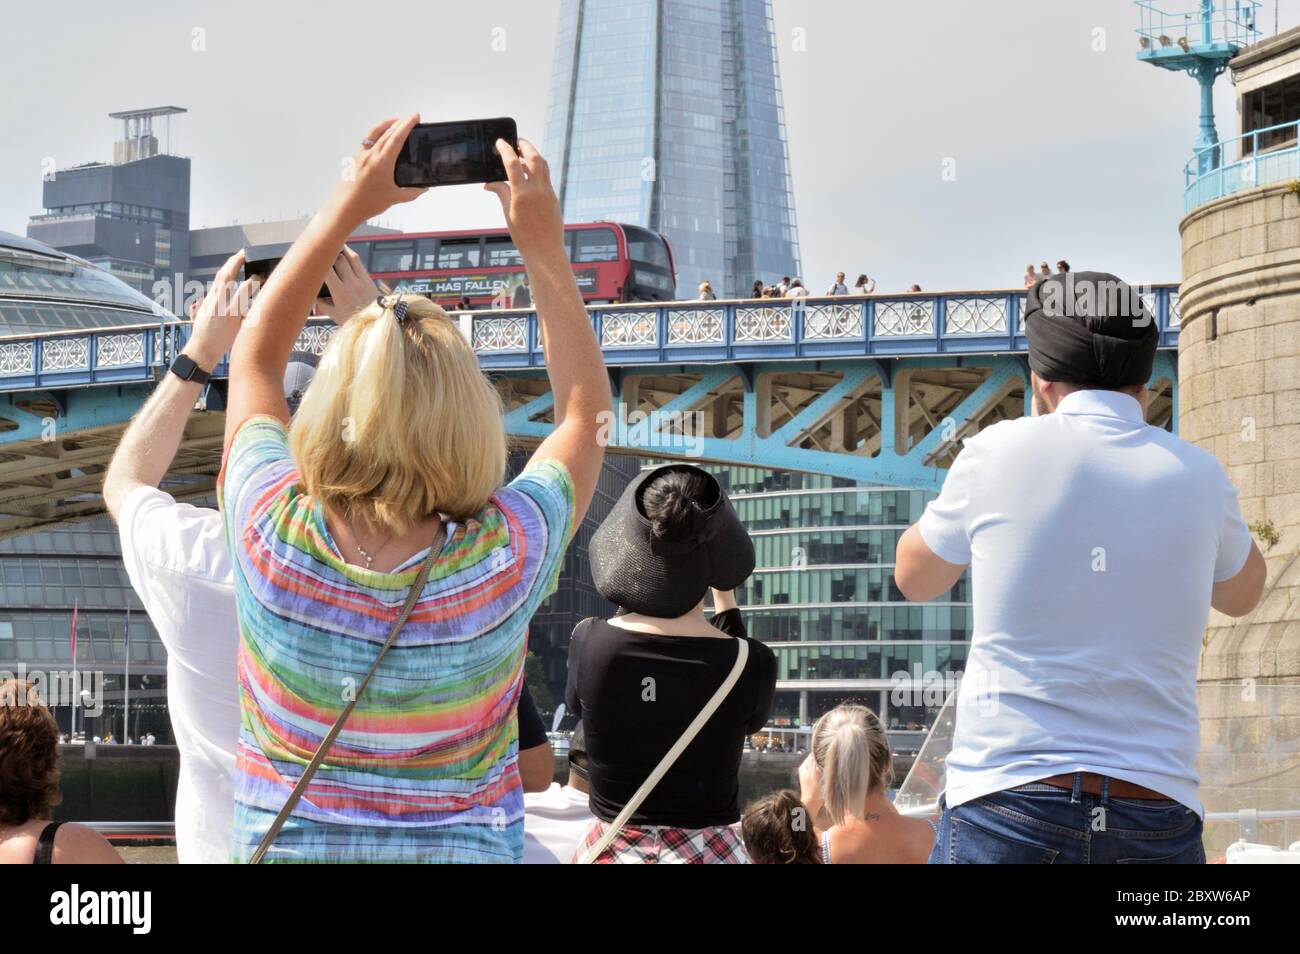 London, UK - August 24, 2019 - Multi ethnic group of tourists photographing landmarks in London. Stock Photo